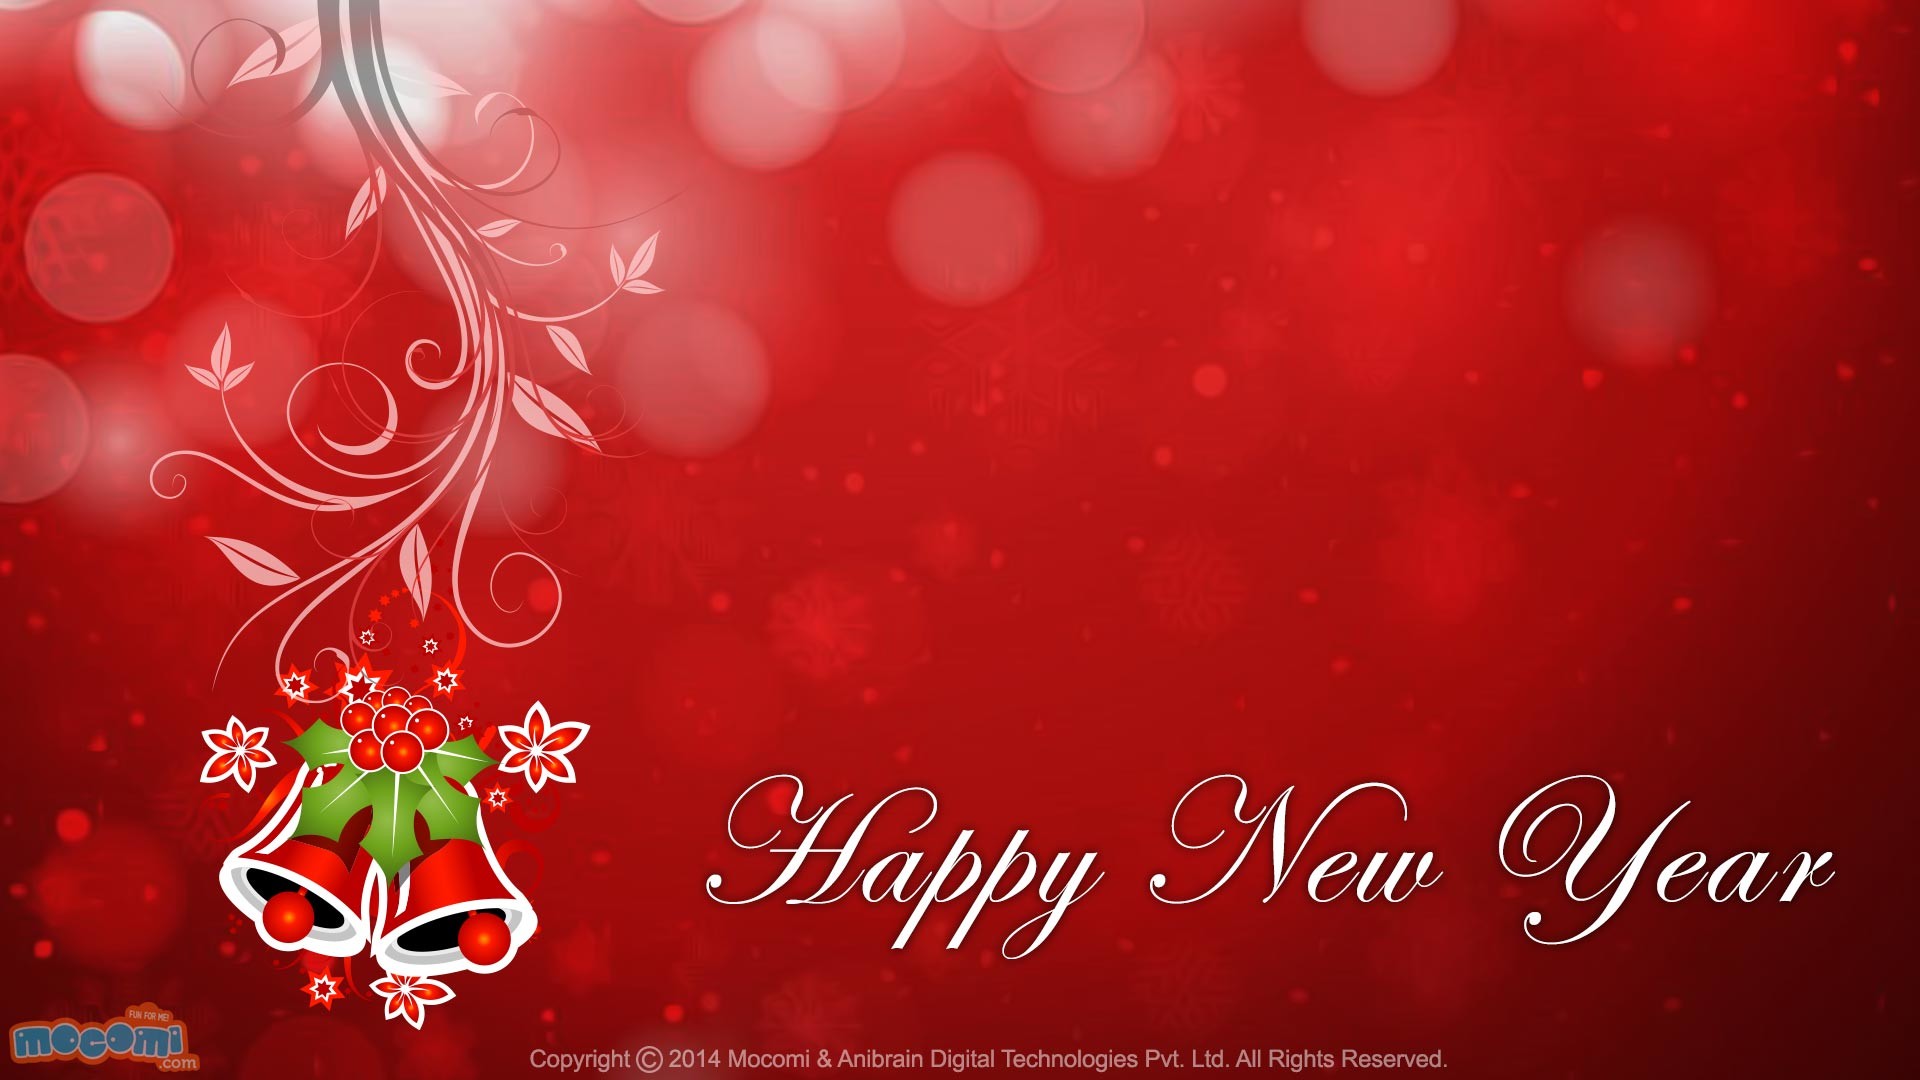 1920x1080 Top 100 Download Happy New Year Images Wallpaper